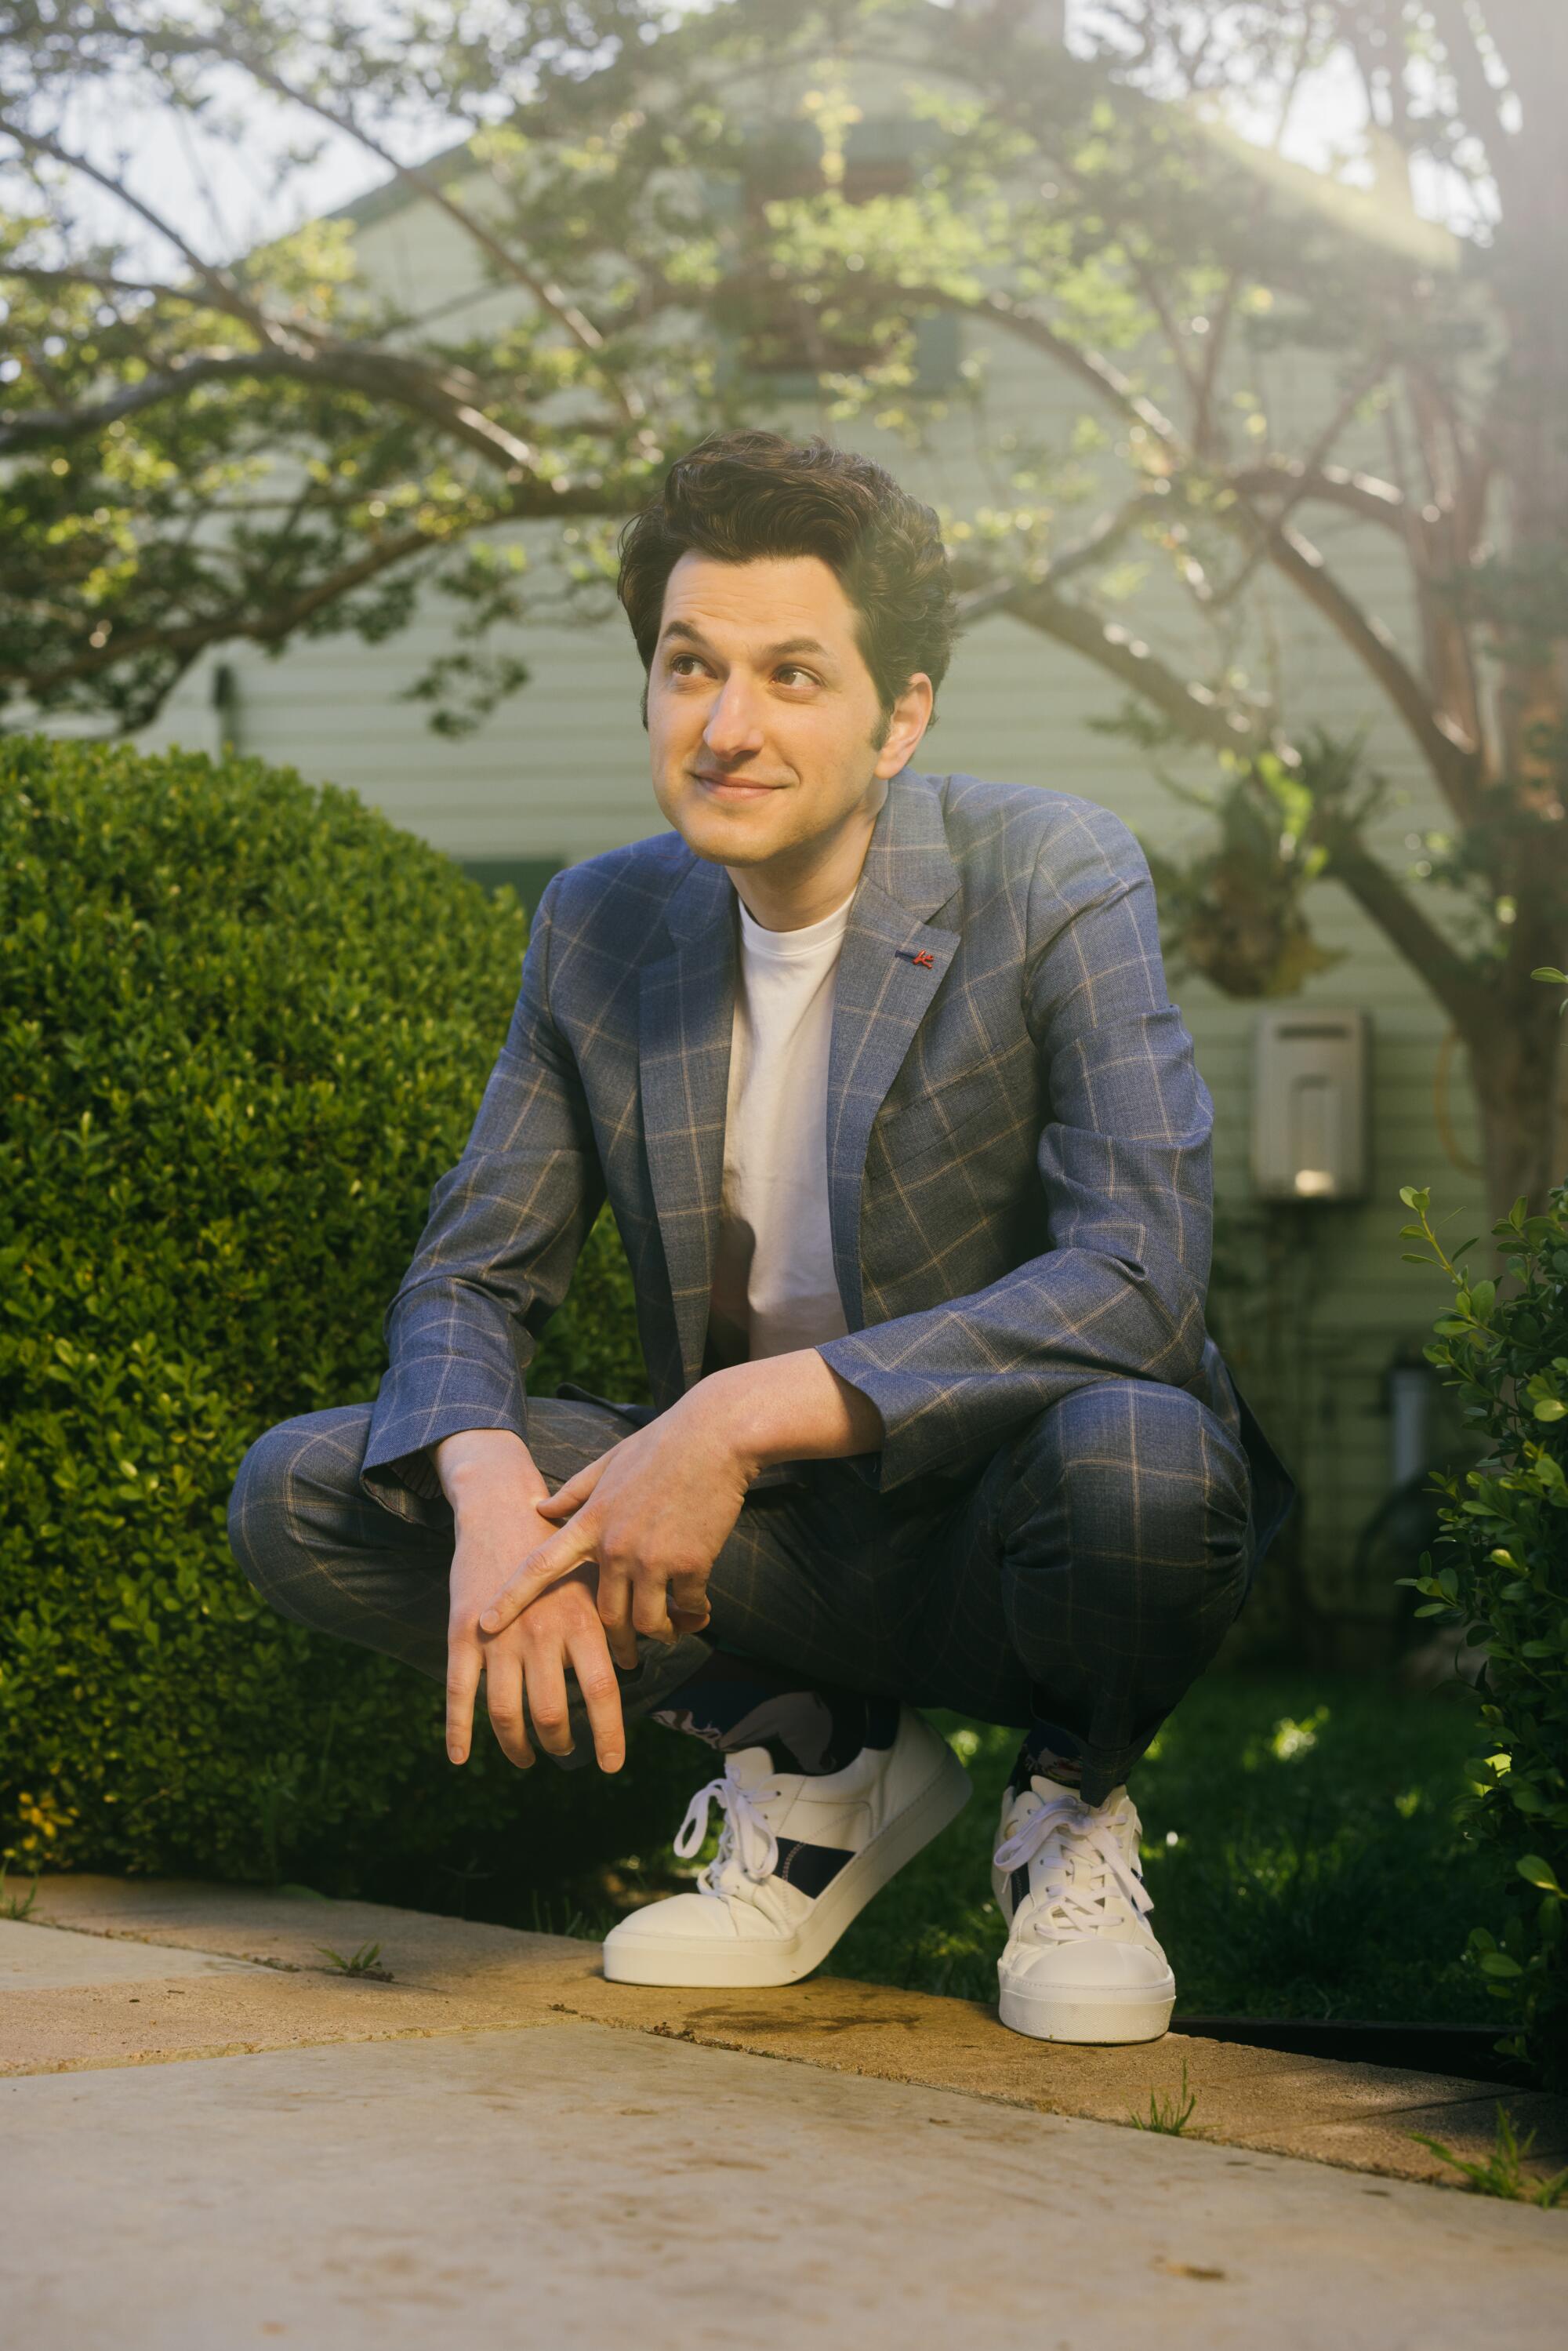 Ben Schwartz bends down in front of a bush at a private residence.